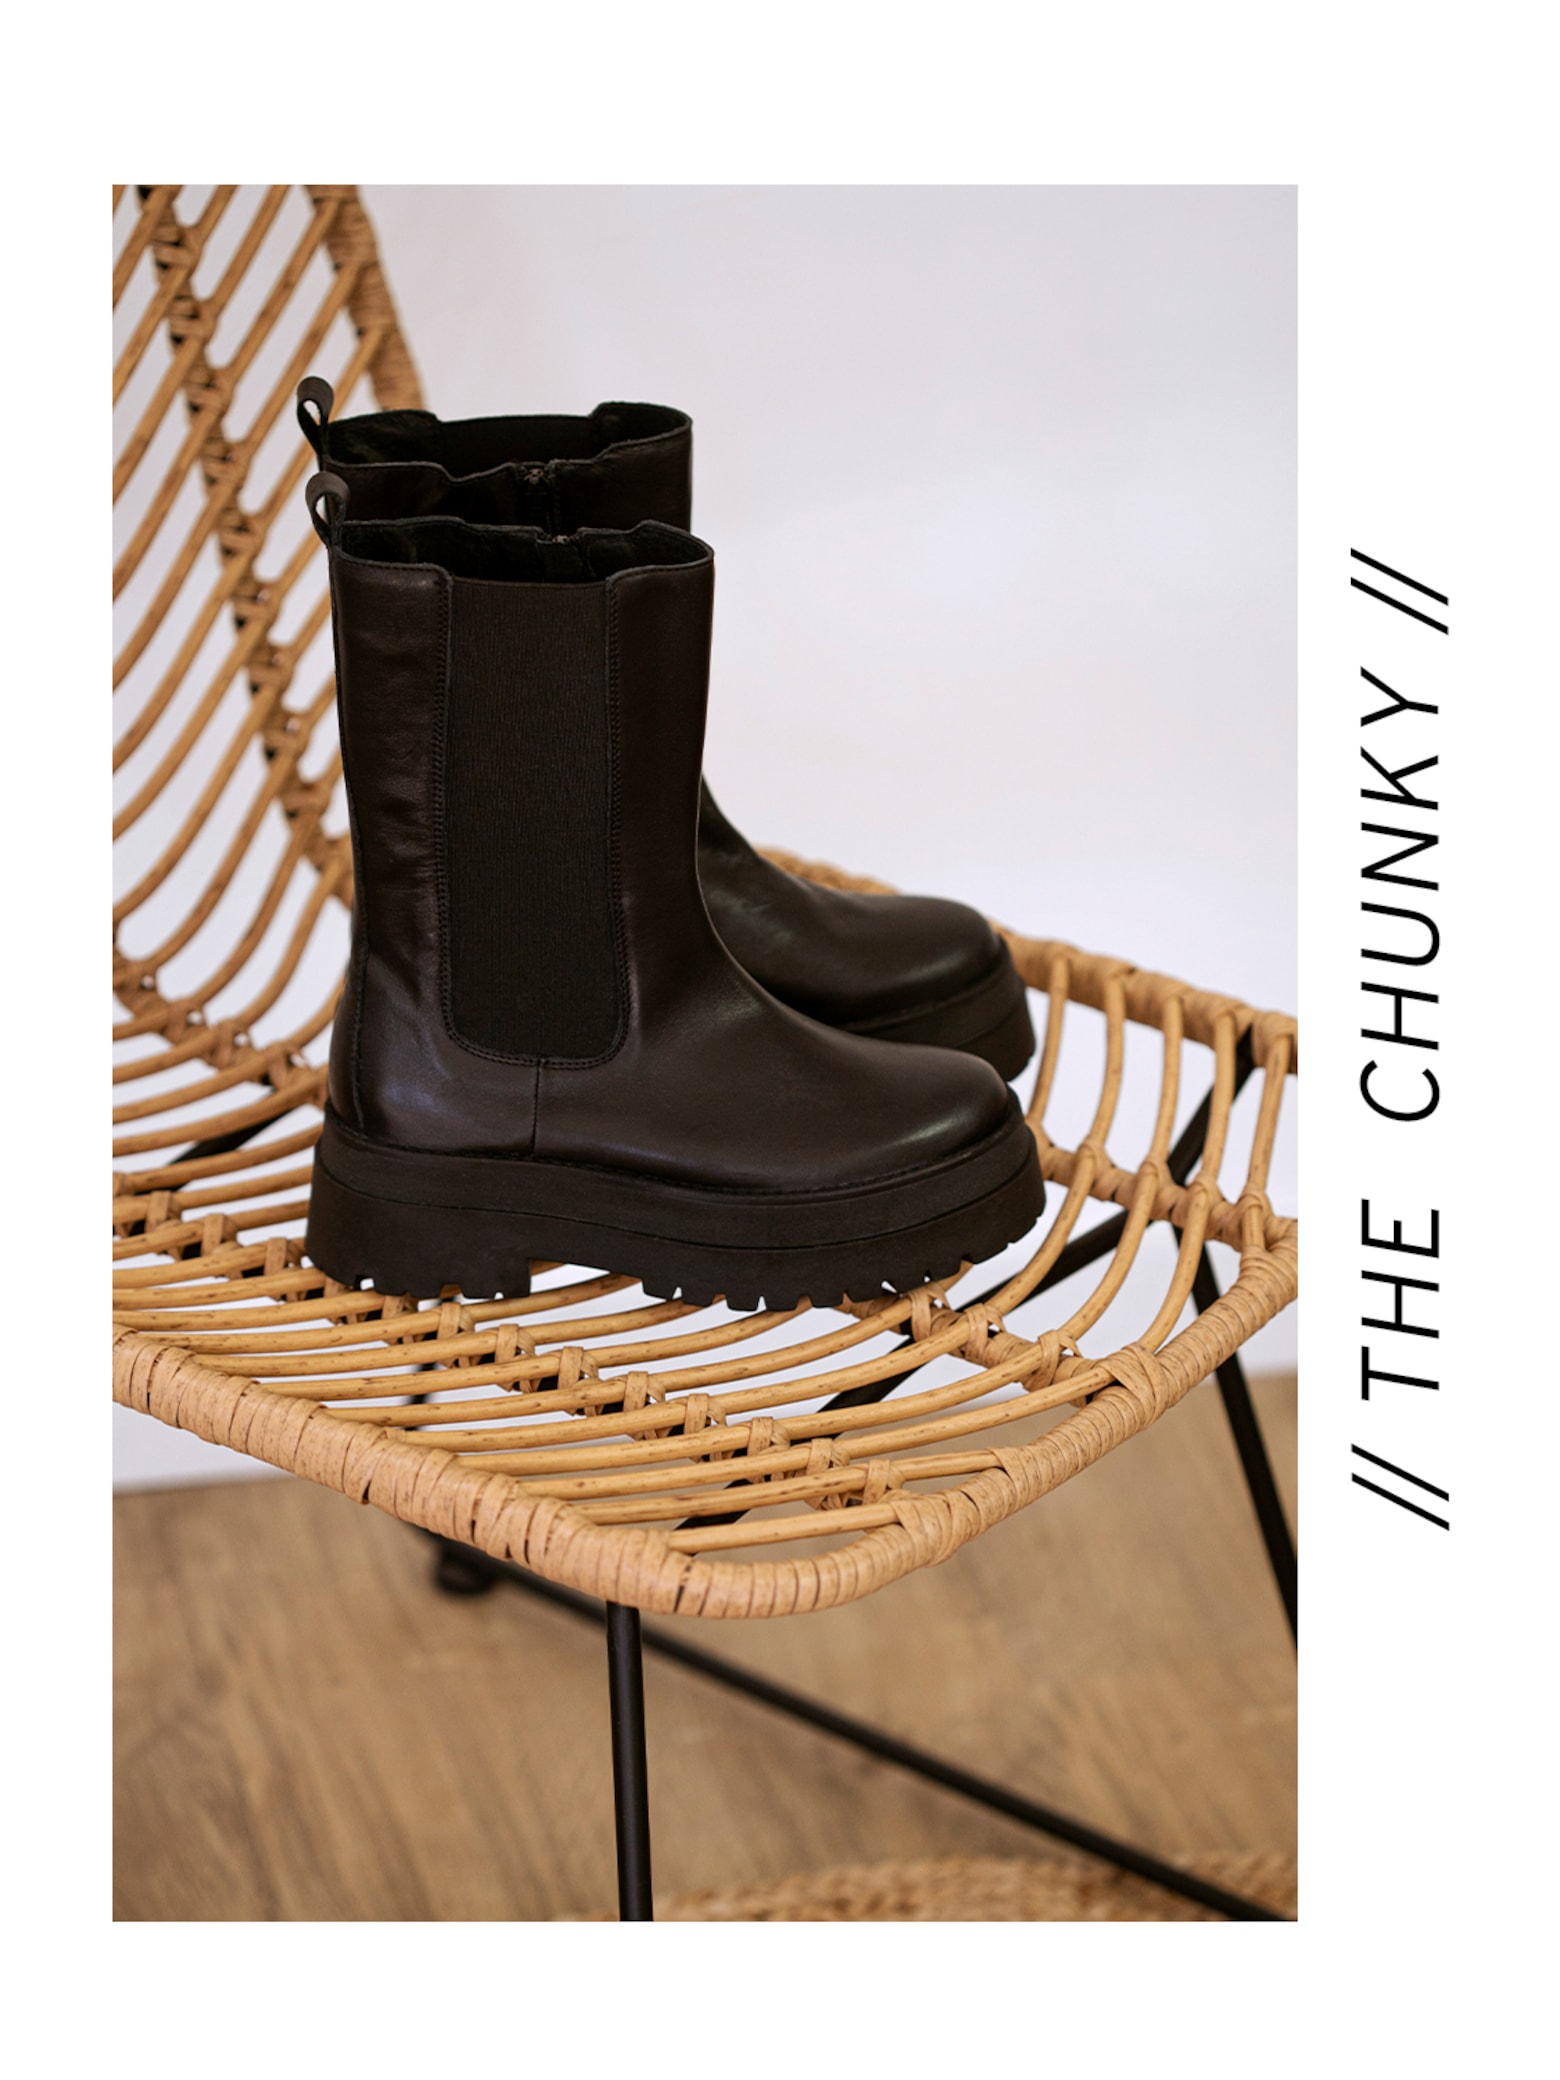 Chunky, Slouchy & More The New Boot Trends